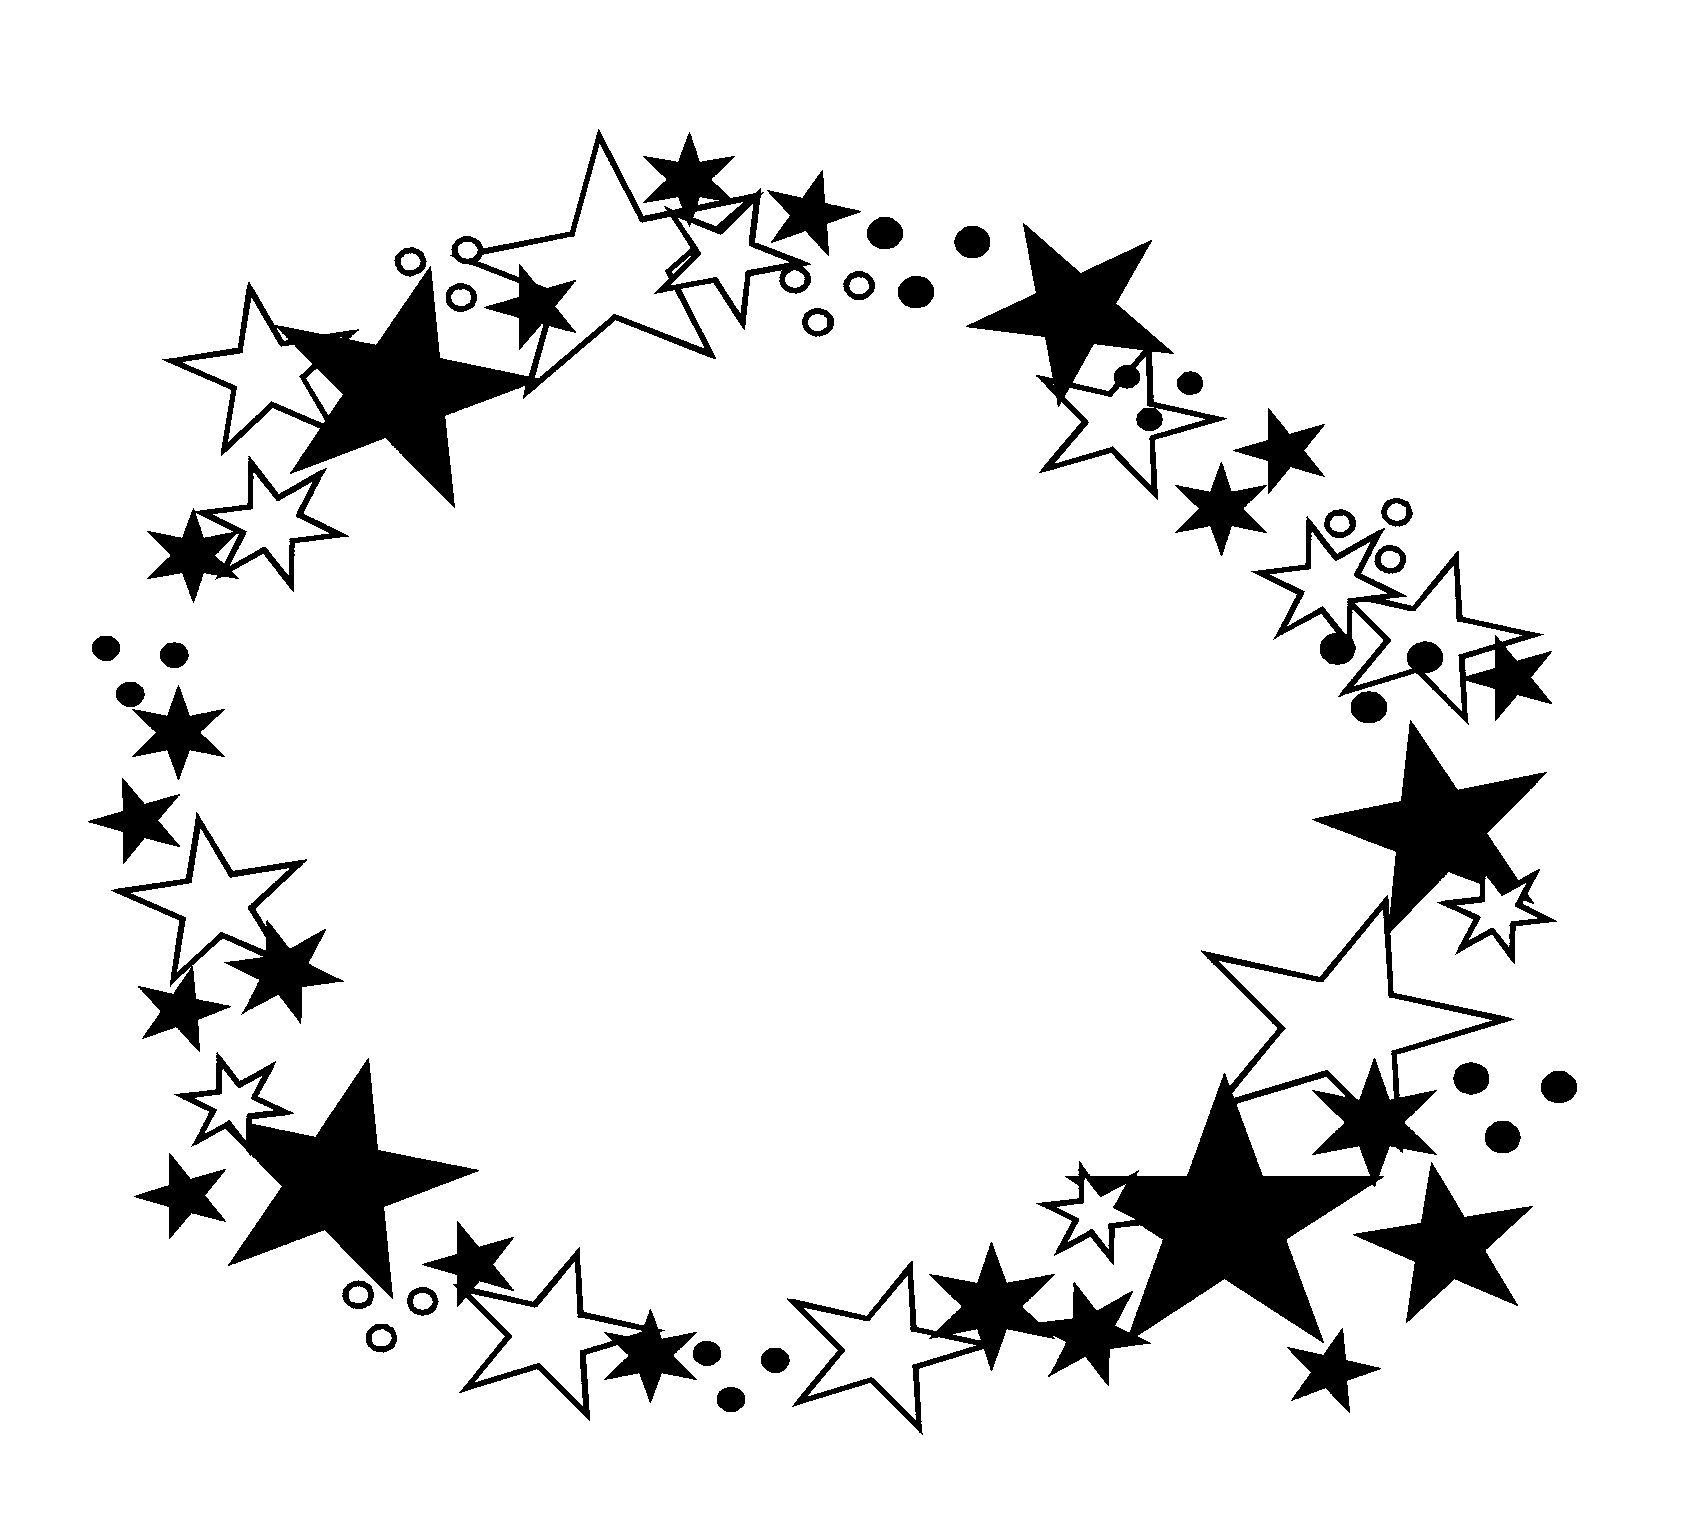 Star  black and white image of stars clipart black and white